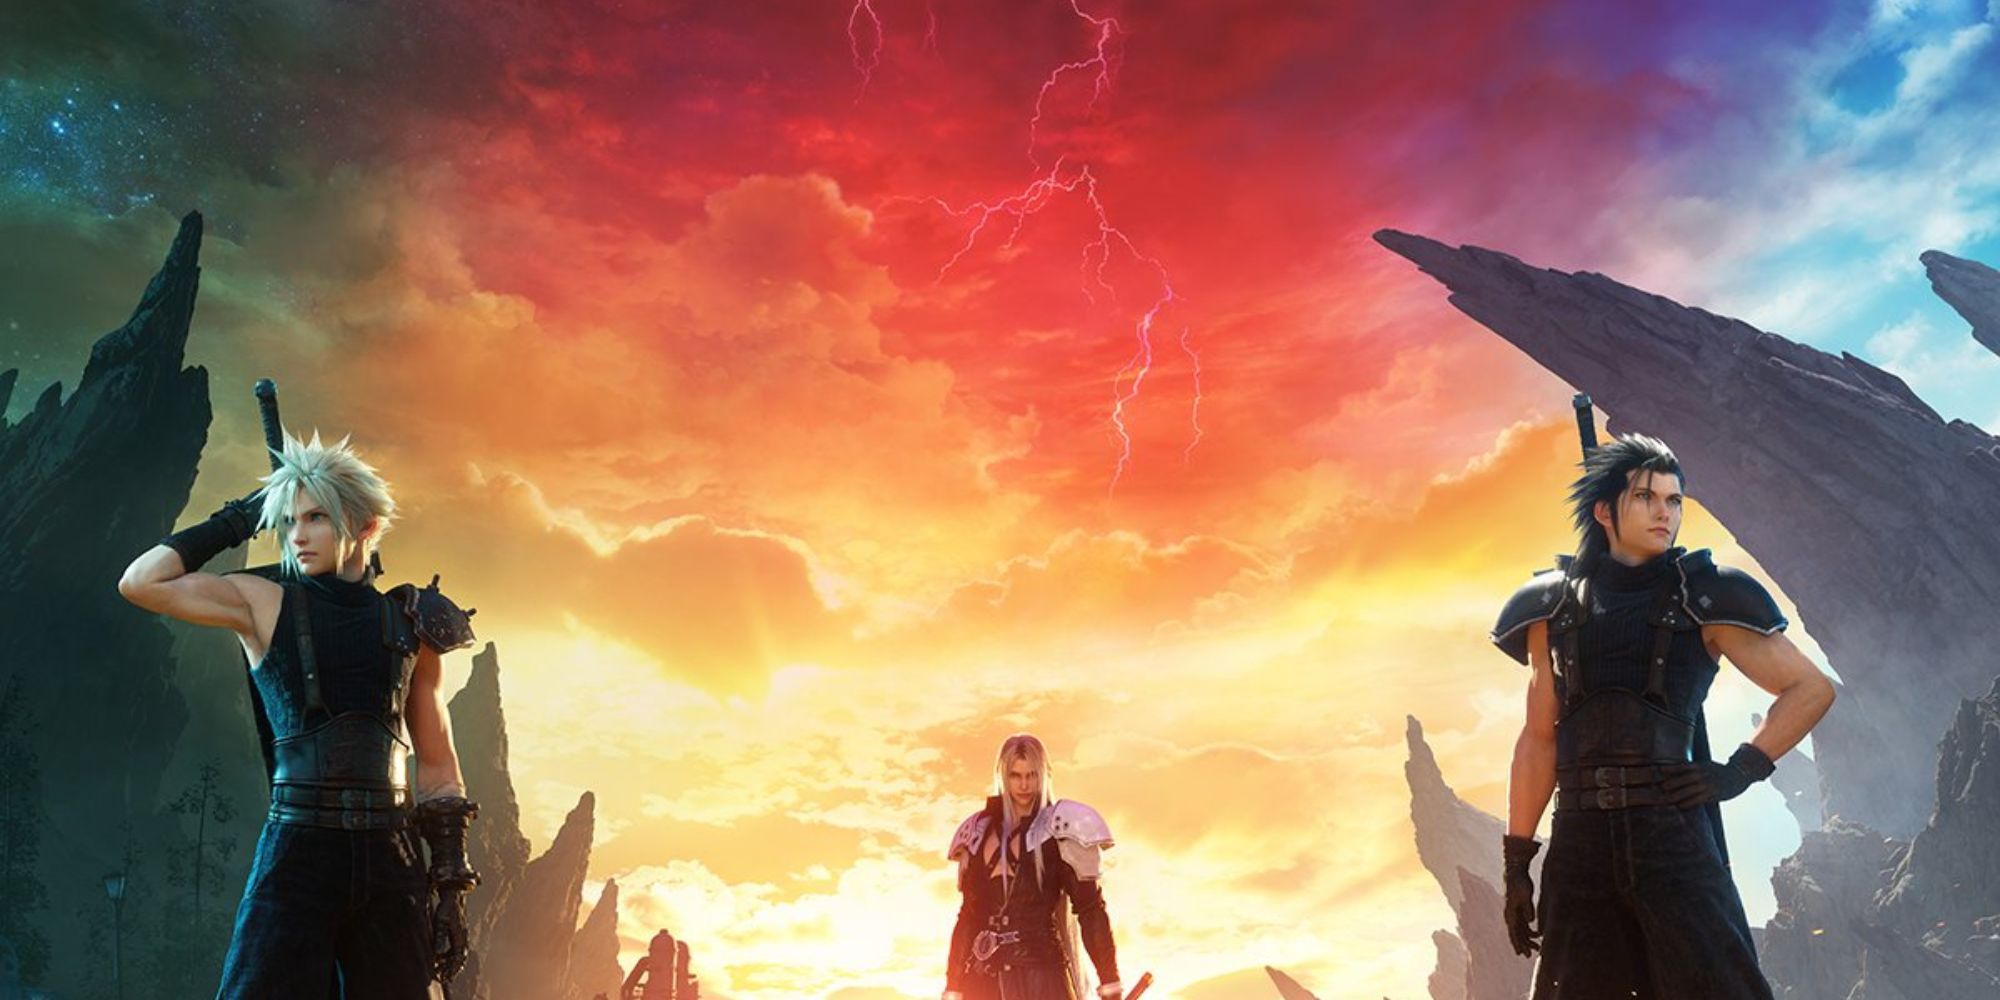 Cloud, Sephiroth, and Zack in Rebirth's key art.